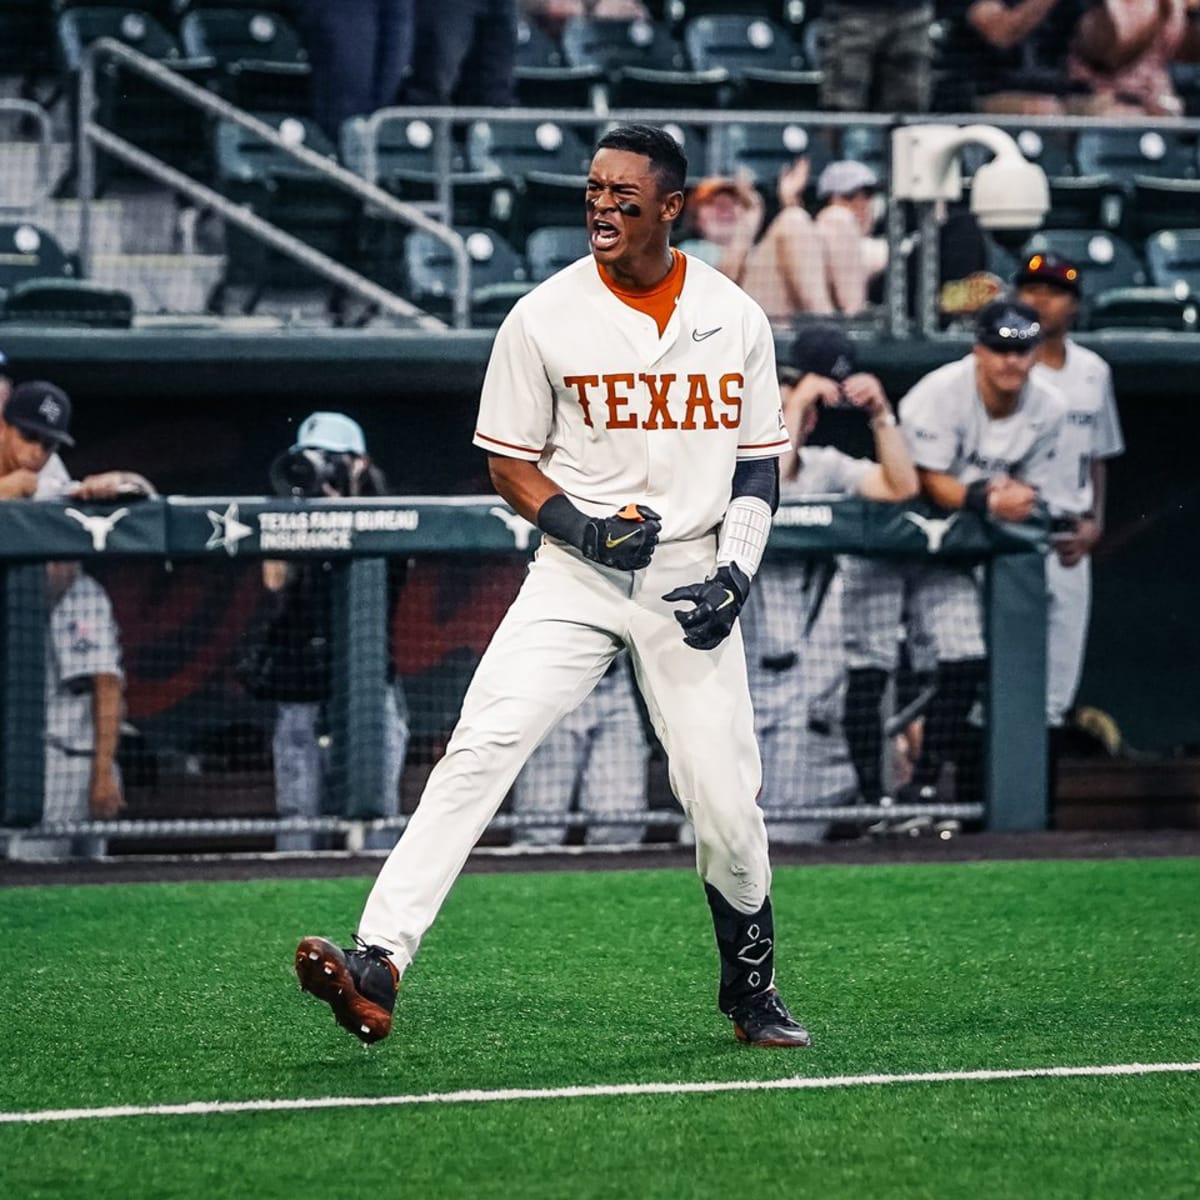 Longhorn fans get first glance, insight into competition within No. 1 Texas  baseball at Alumni Game – The Daily Texan